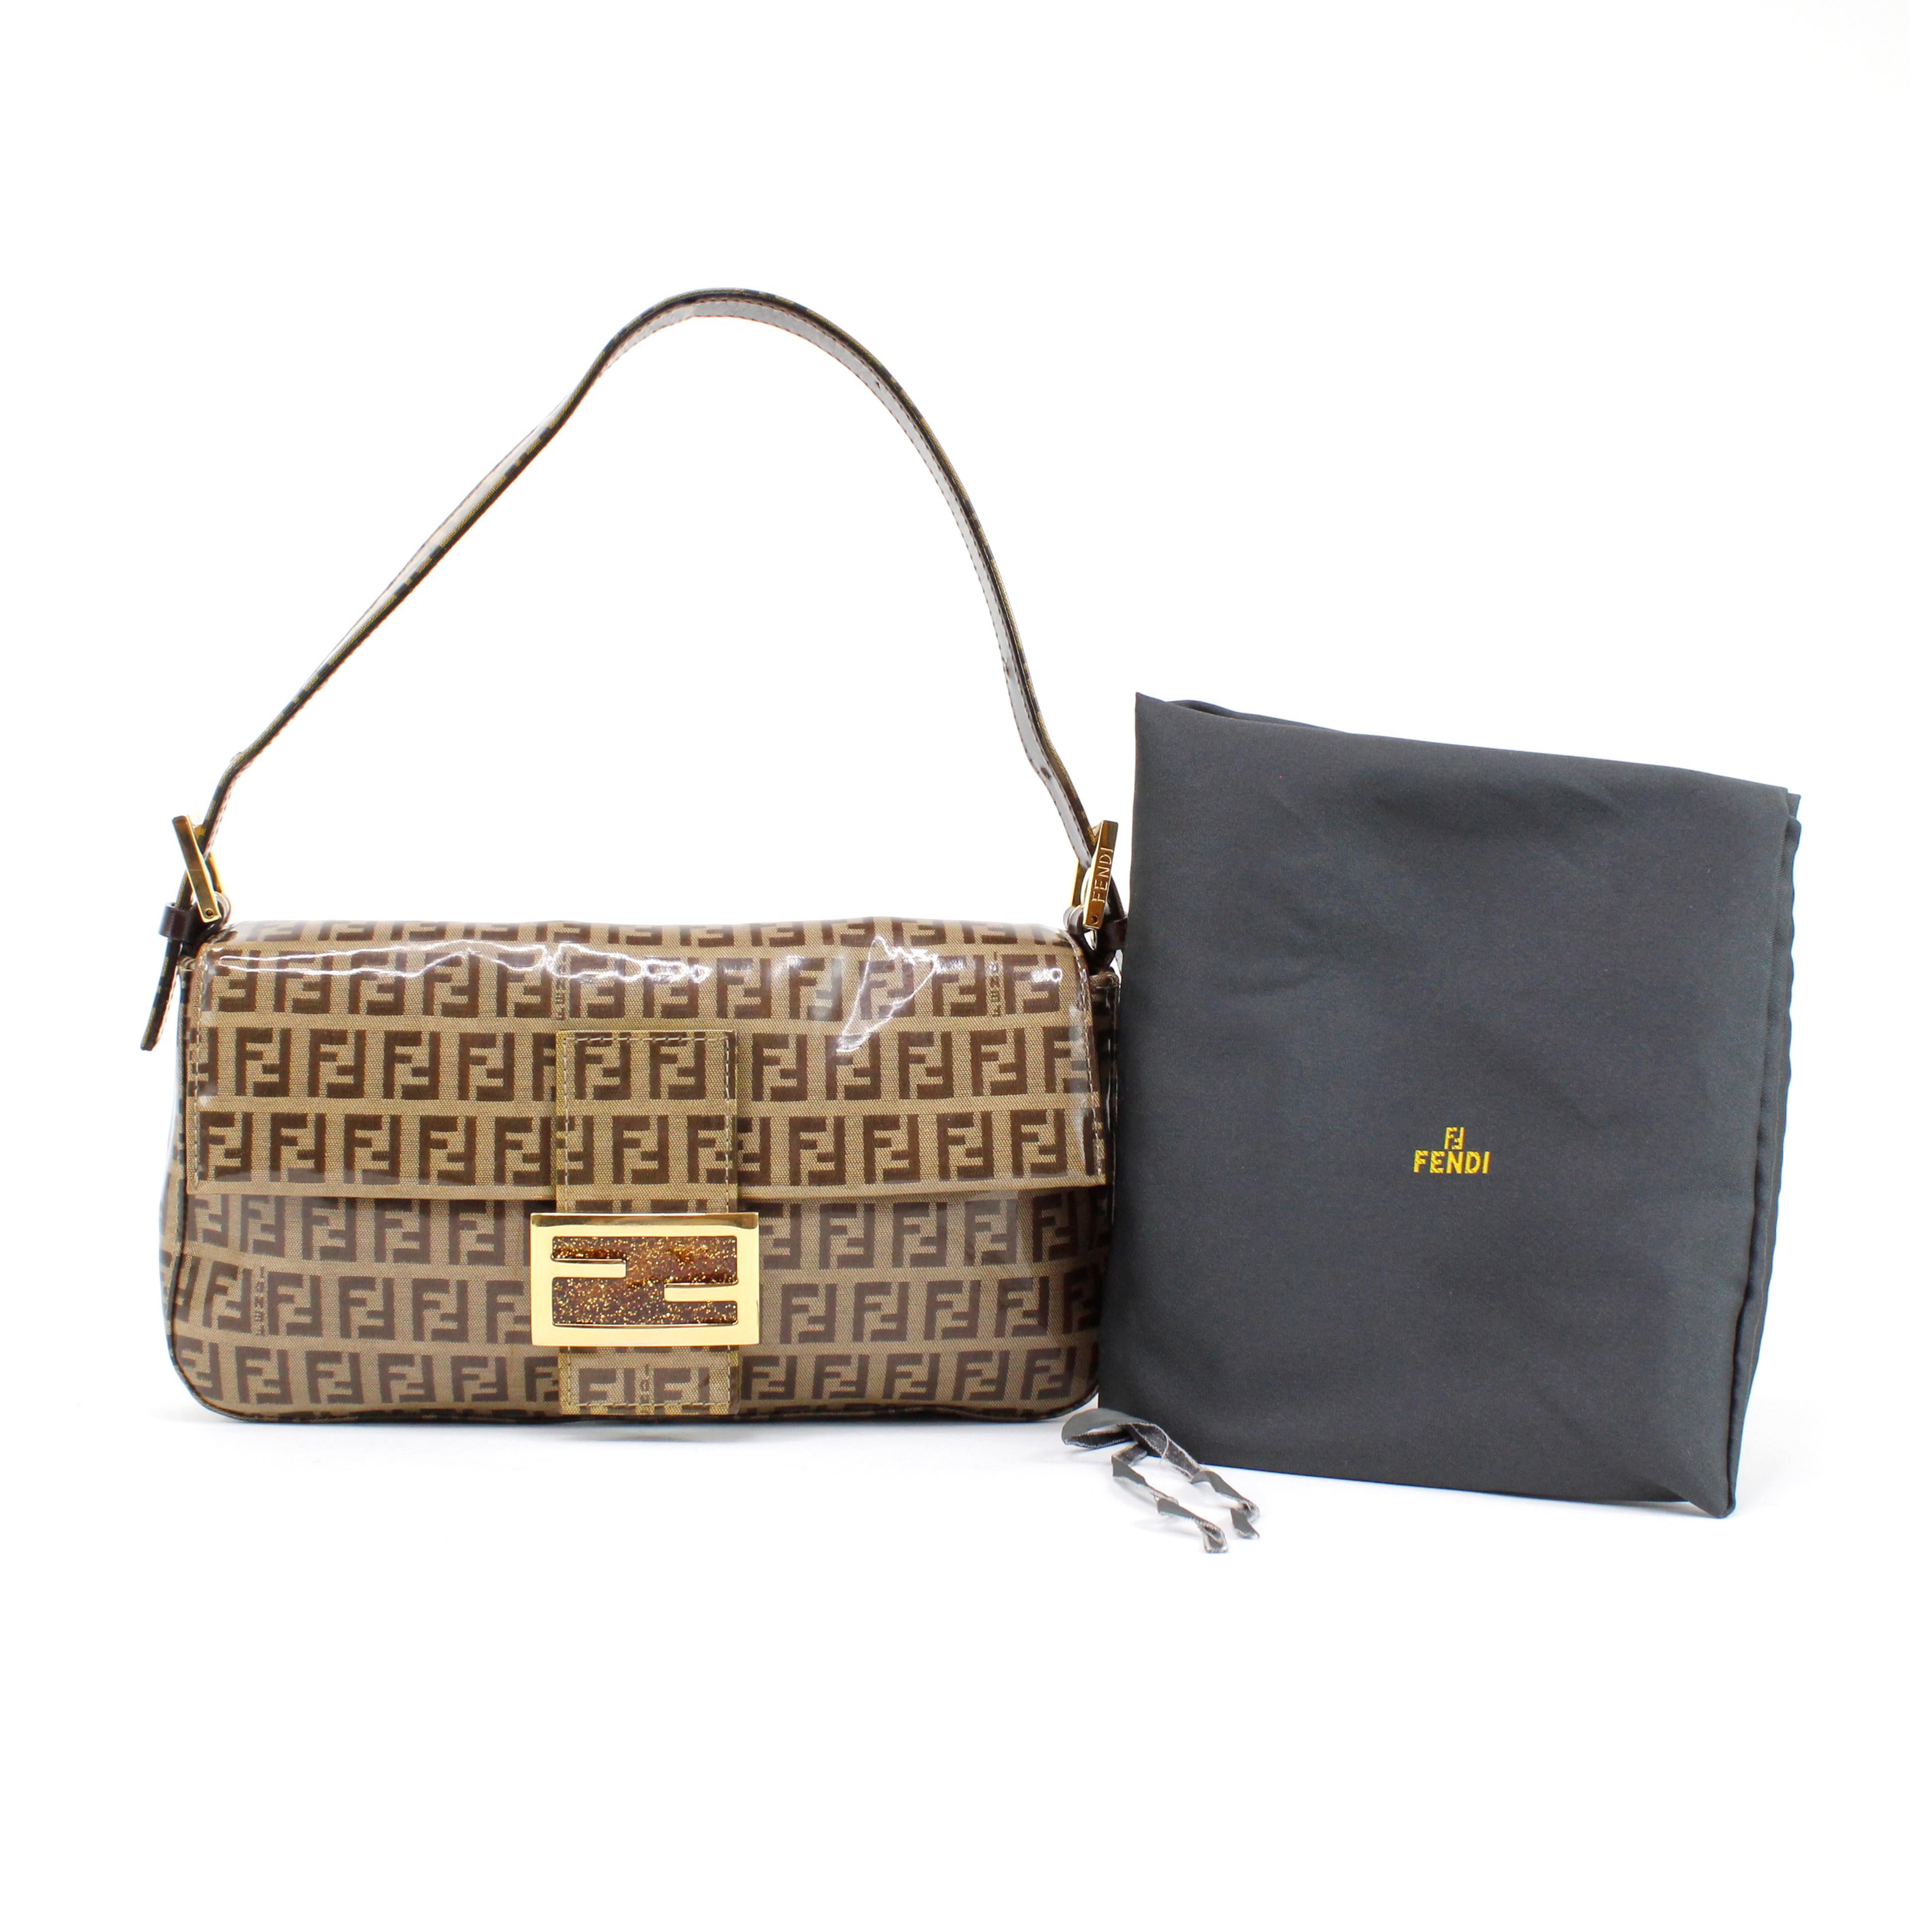 RARE Fendi baguette in zucchino monogrammed vinyl, glitter logo, gold hardware. With dustbag.

Condition: really good, to note: spots around the buckle, micro scratches on the buckle. 

Measurements: 
Width: 26 cm
Height: 15 cm
Depth: 4 cm